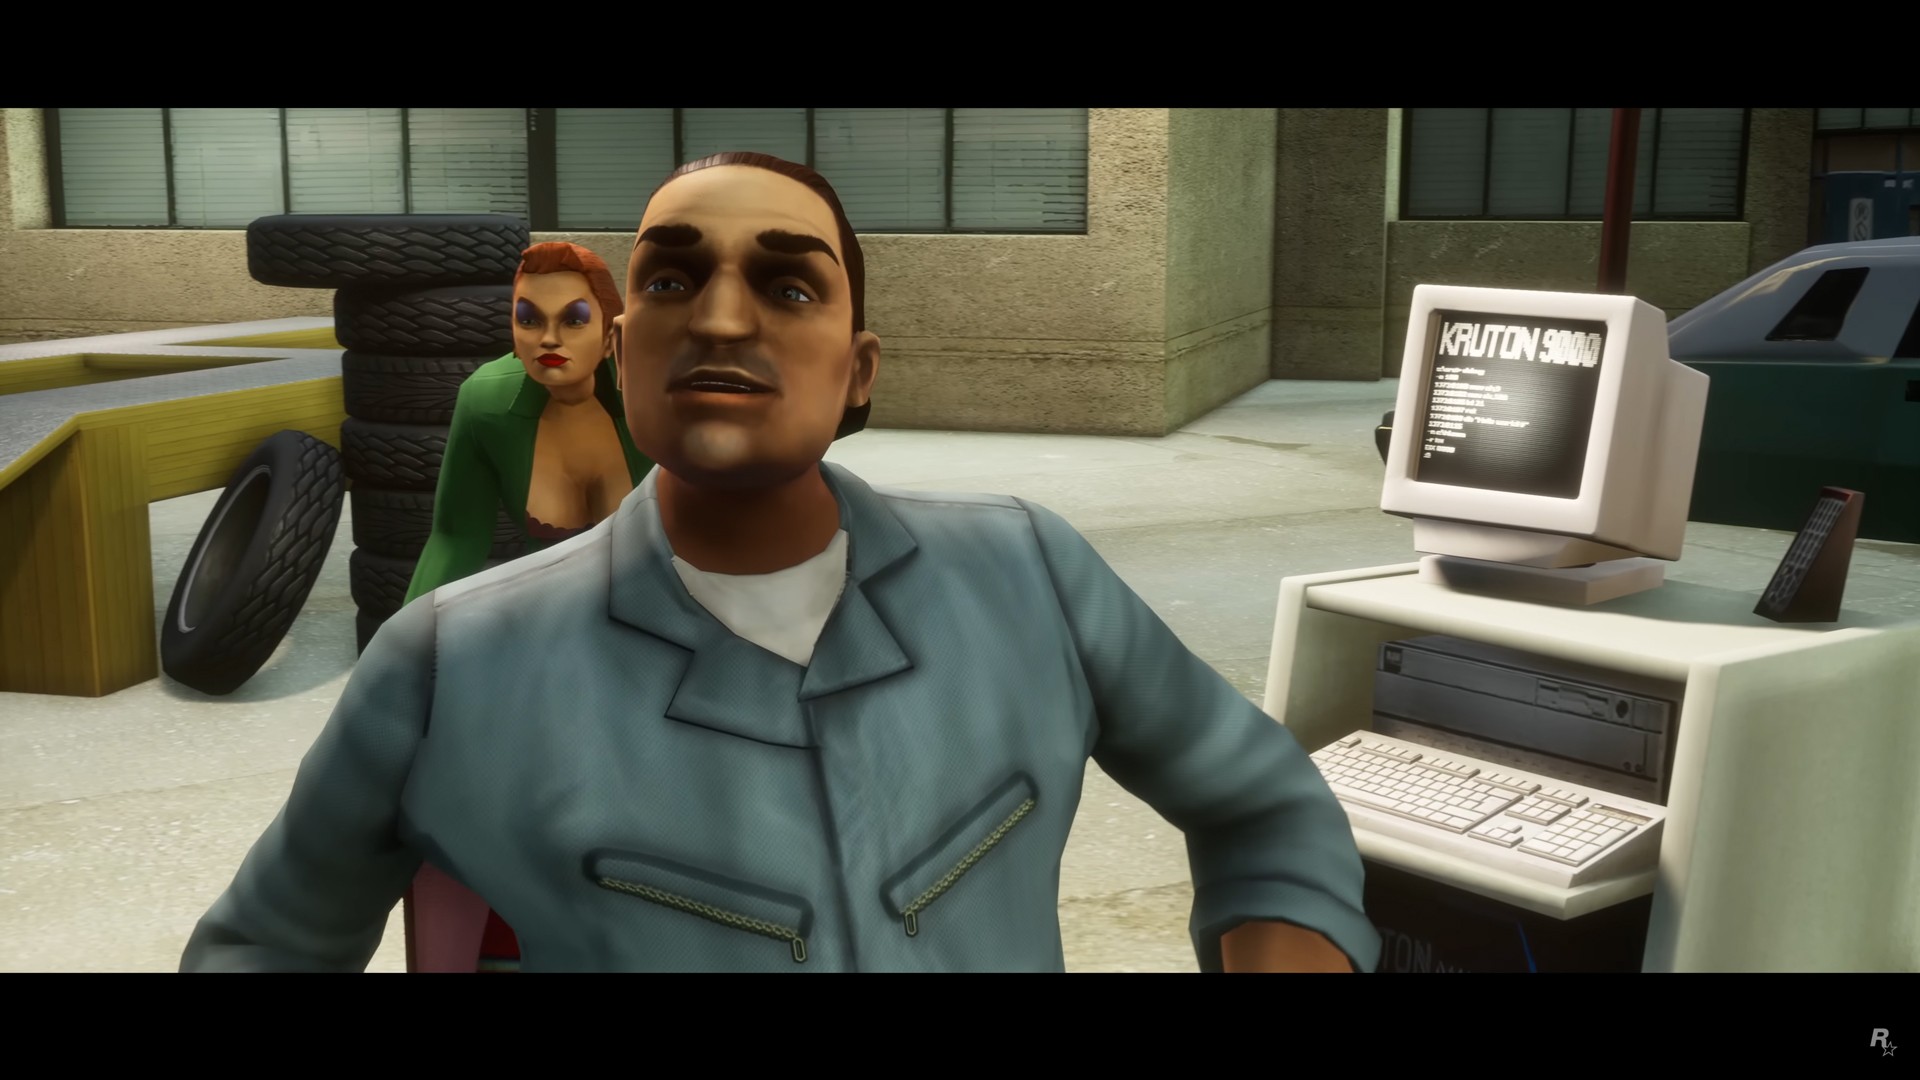 GTA III, Vice City, and San Andreas Are Coming to Netflix Games on